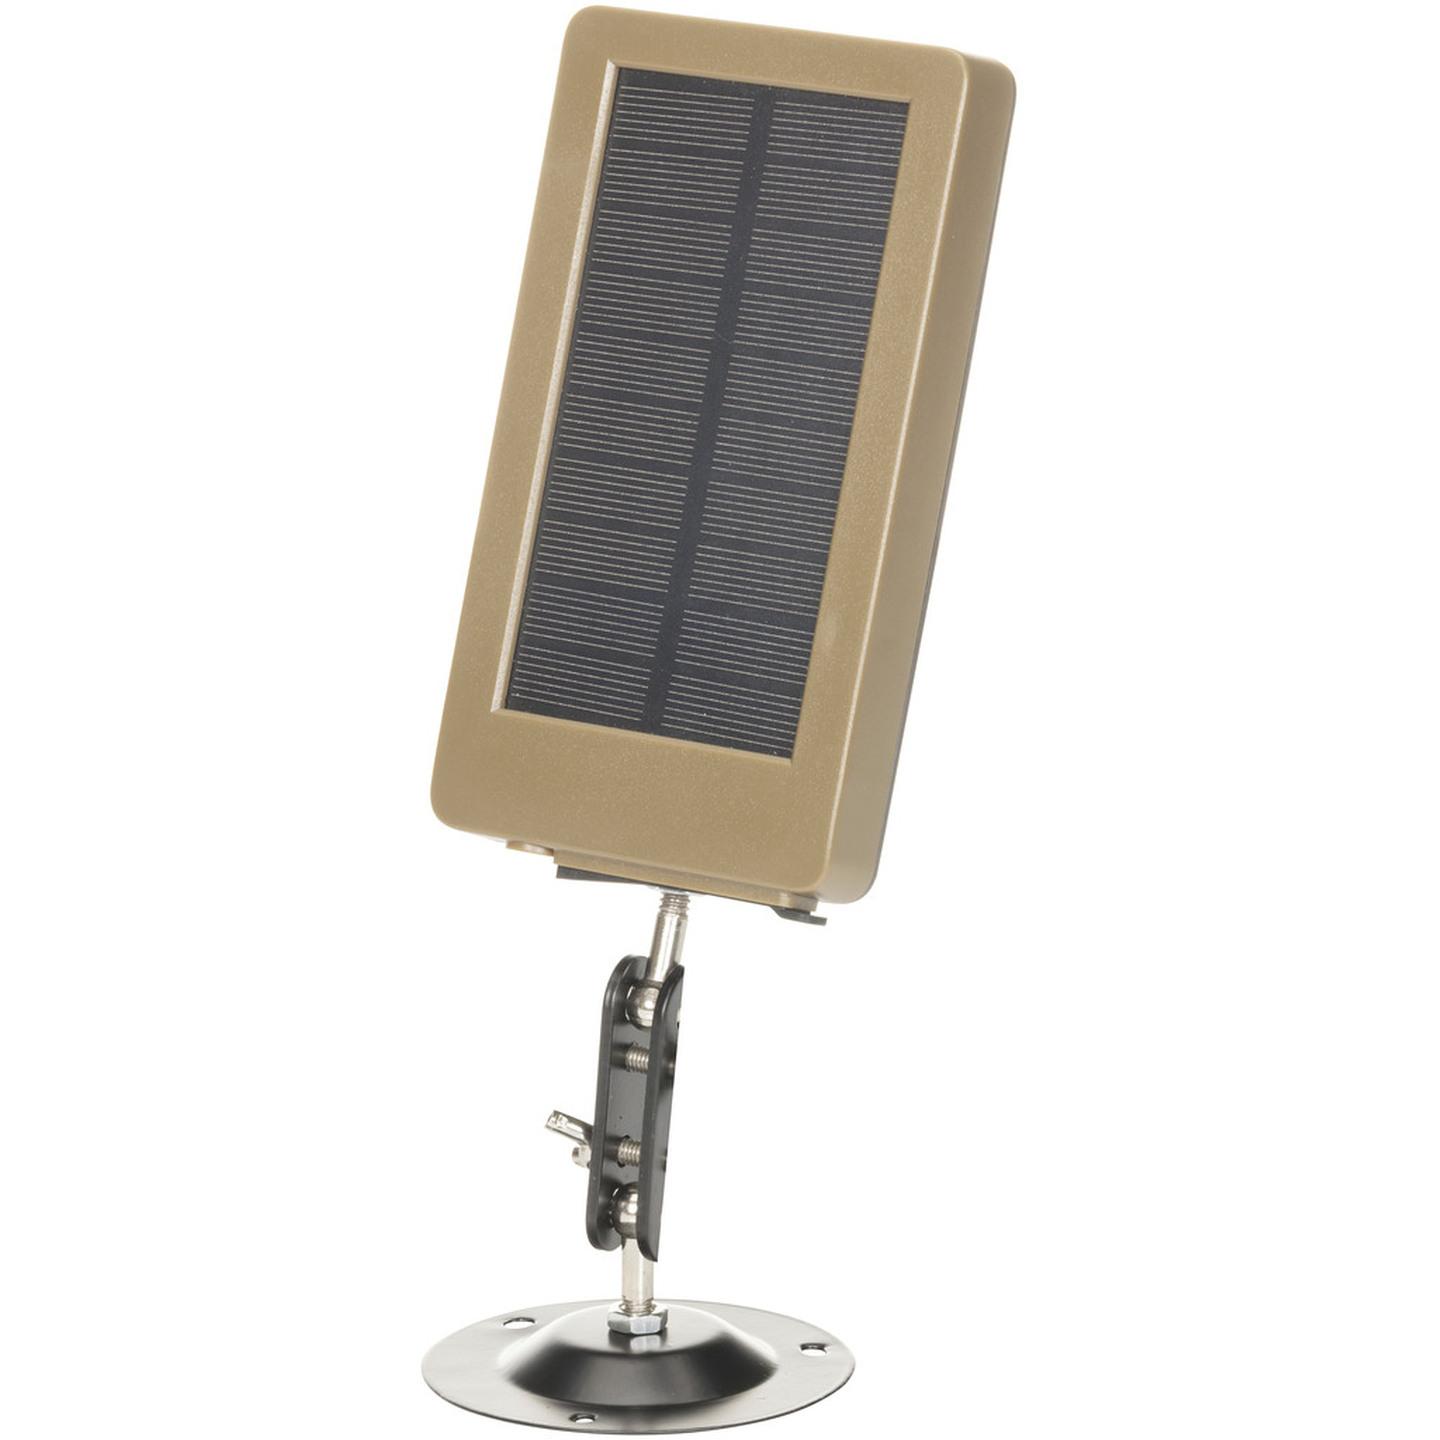 12V Solar Panel to Suit Outdoor Trail Cameras QC8067